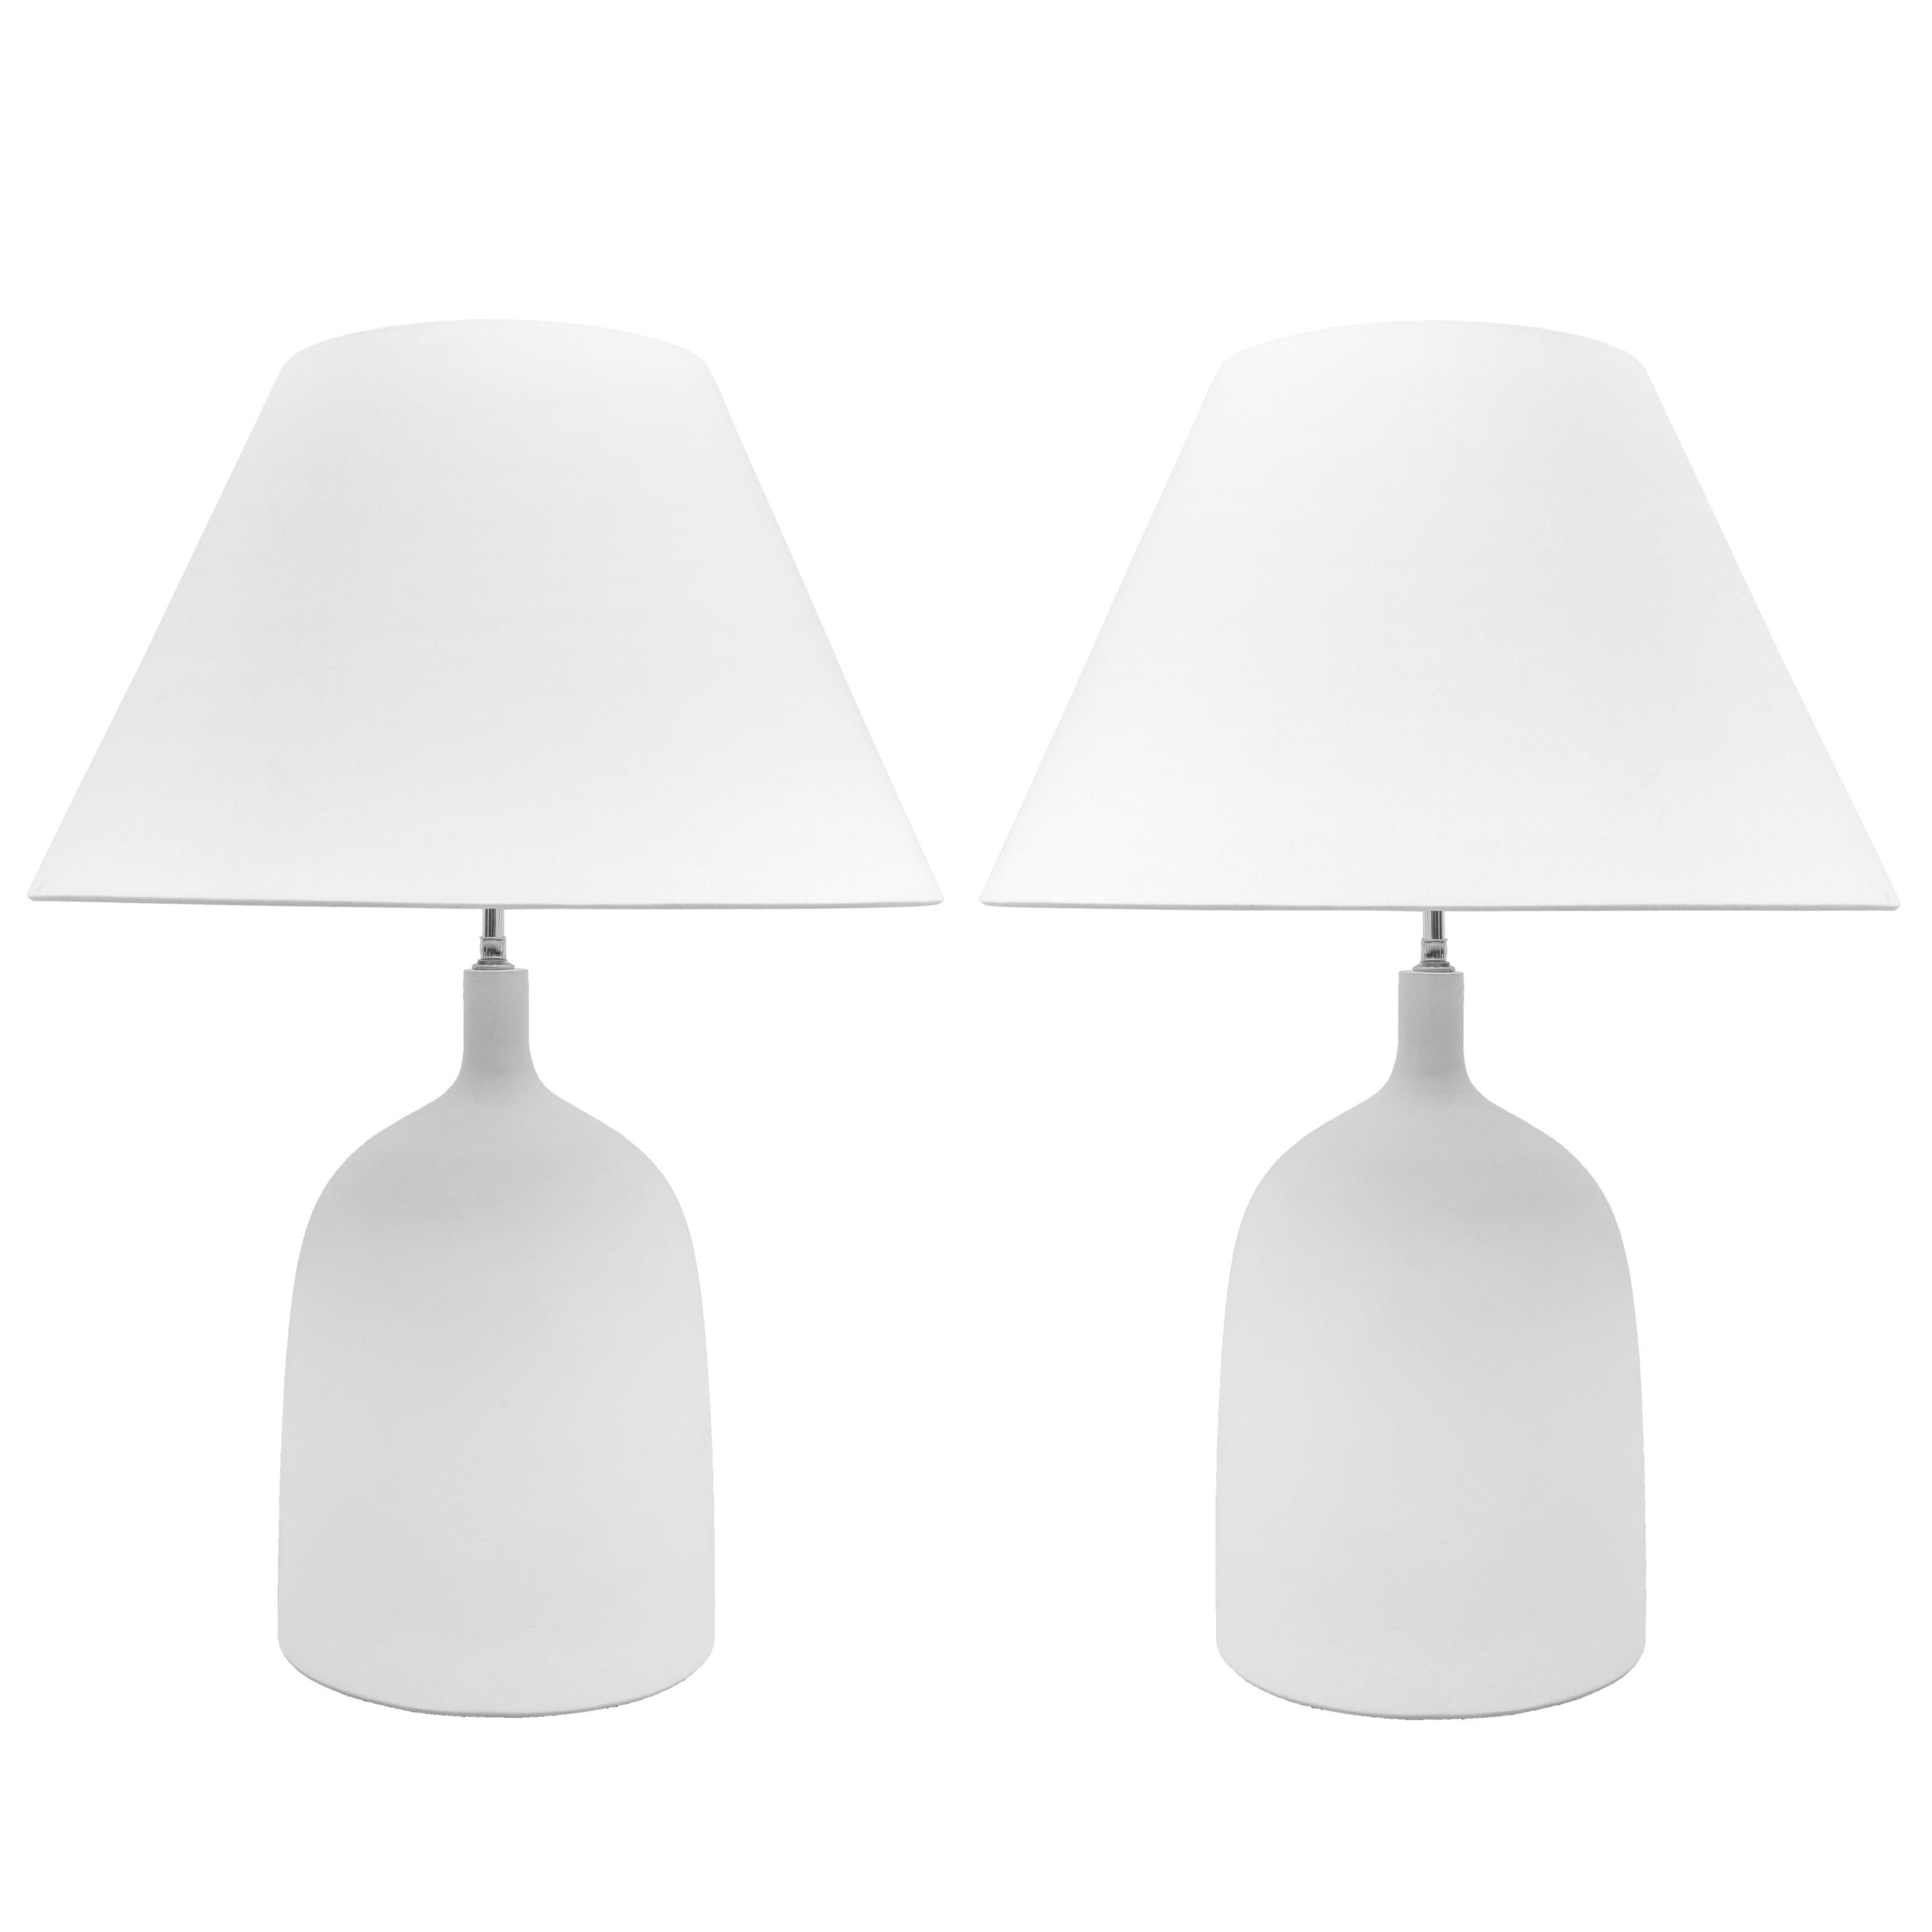 Pair of custom plaster Delphine lamps.
One pair currently in stock. Lampshades are not included.
Please note that these lamps are customizable in size, color, material.
Lead time is 8-10 weeks.
Measures: Height to tip of finial is 29.5